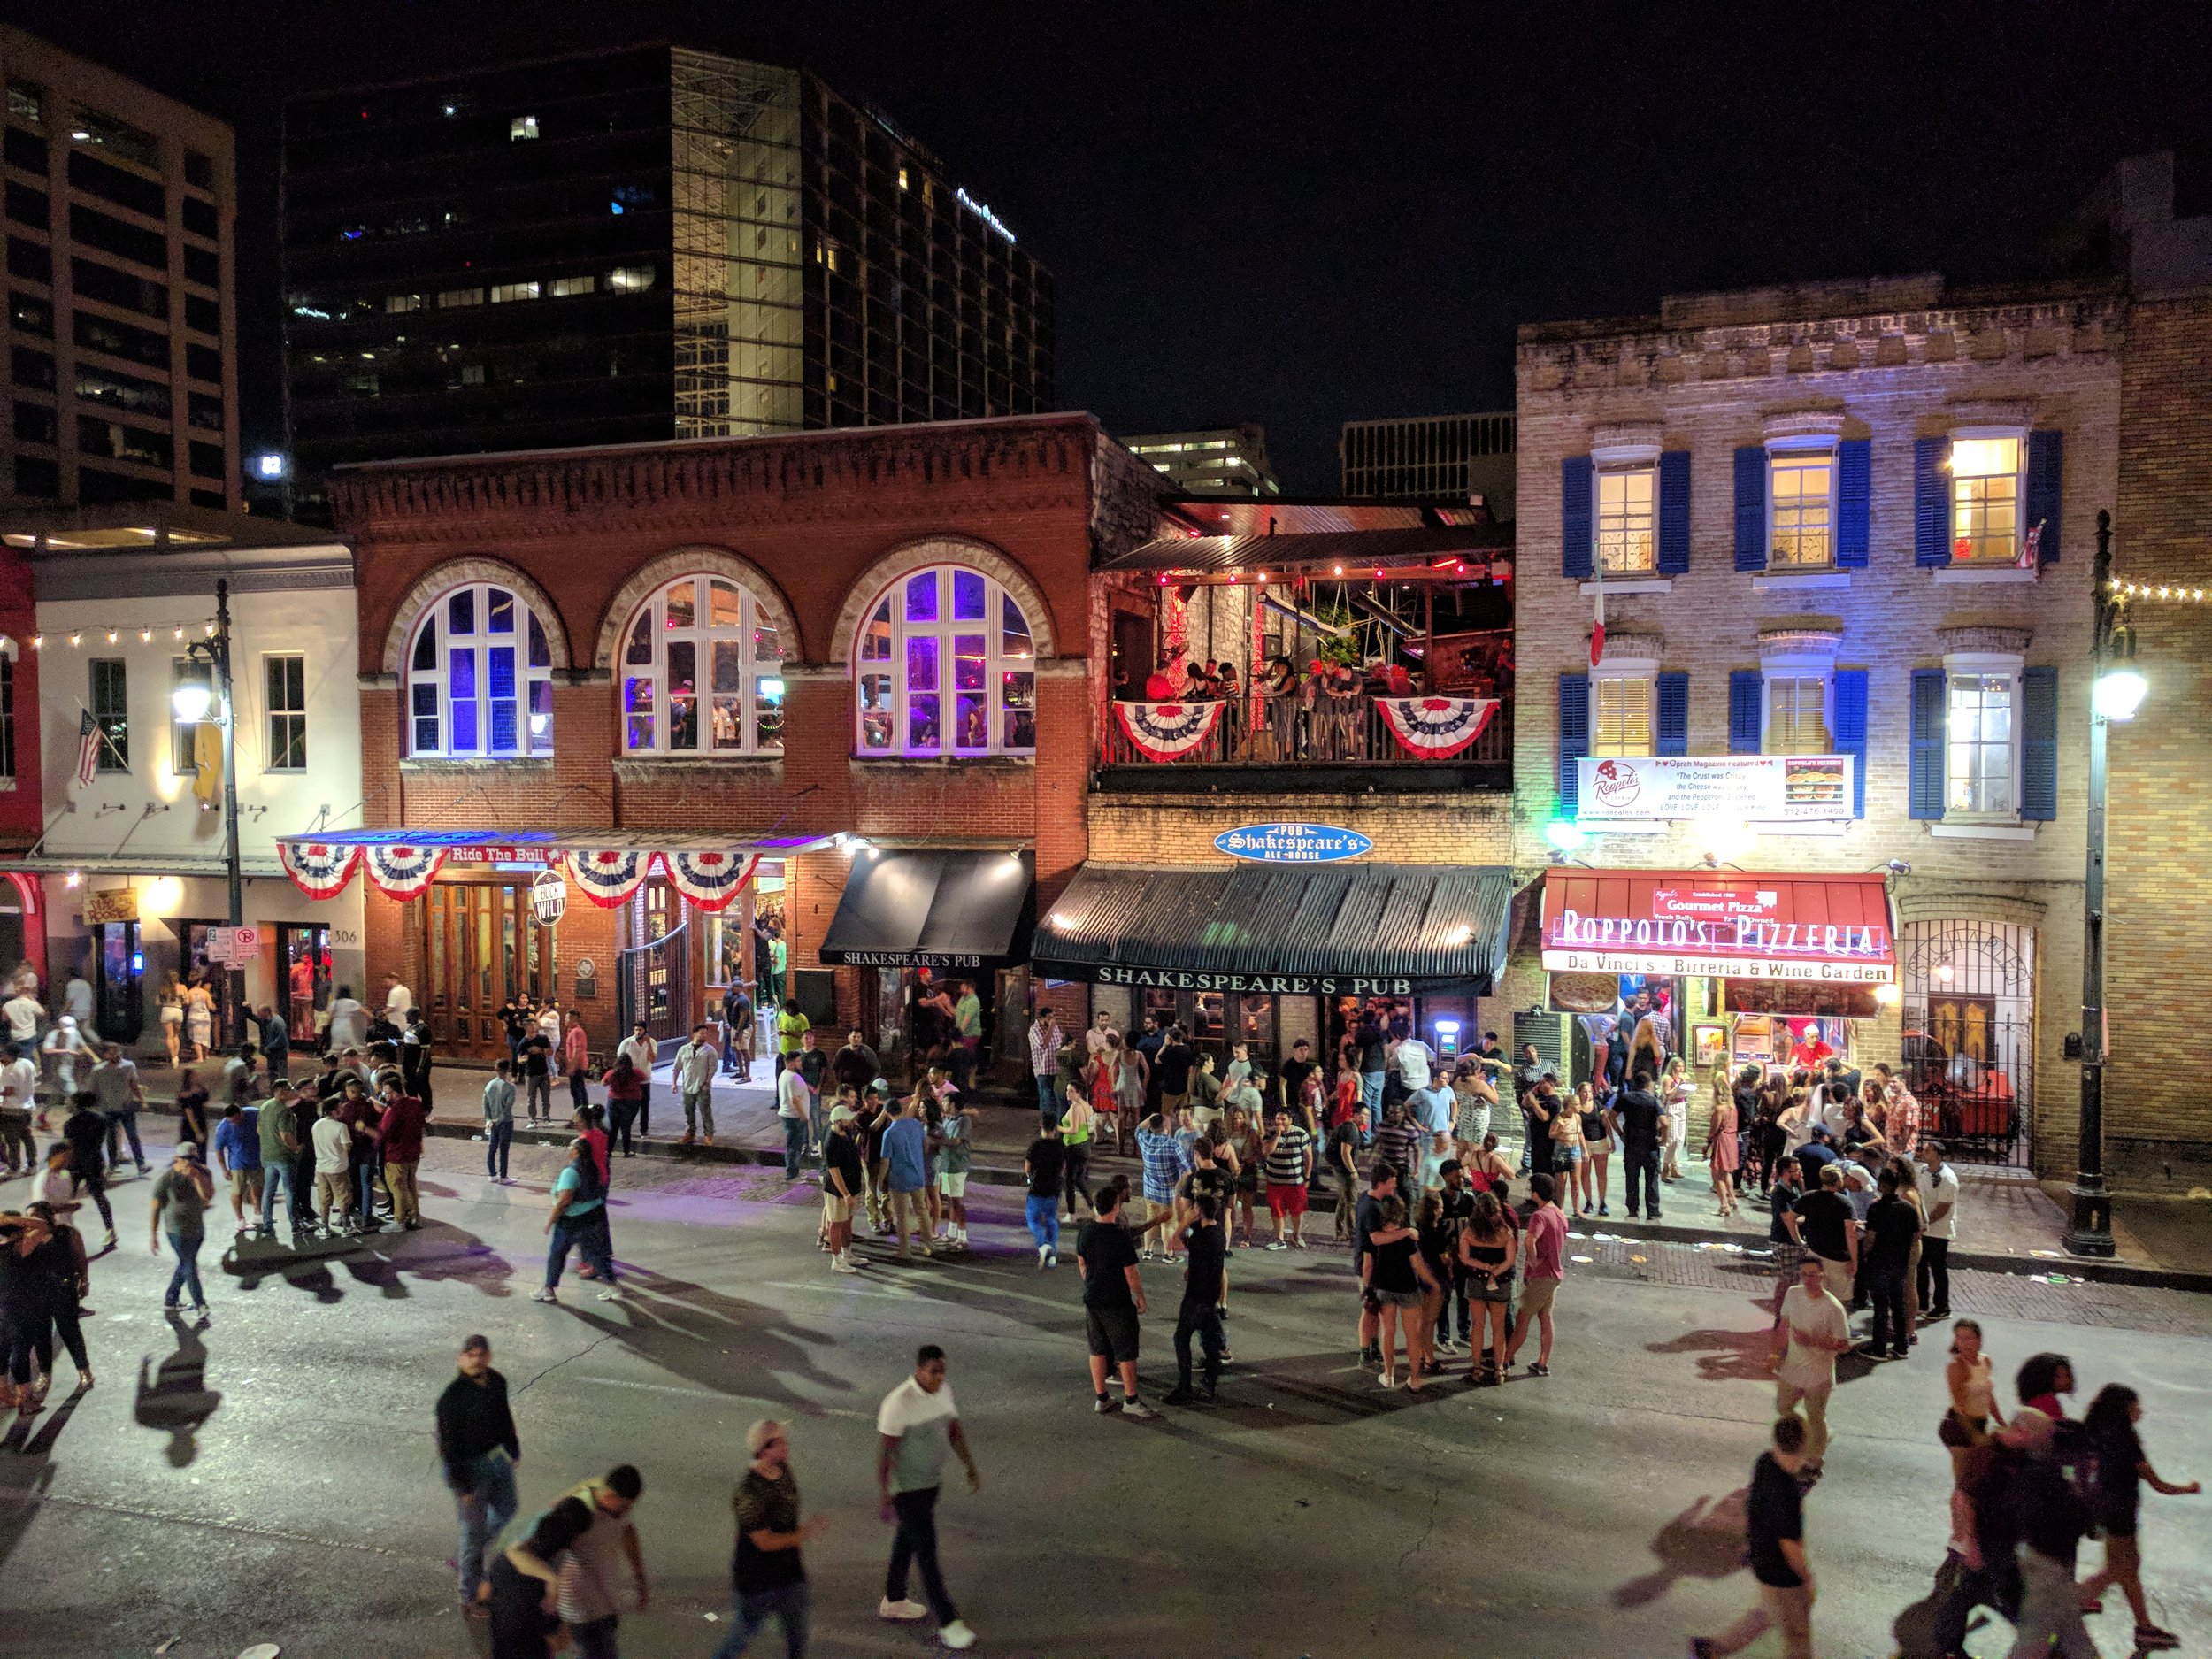 Best Clubs in Austin: Ultimate Guide to Austin's Nightlife & Dance